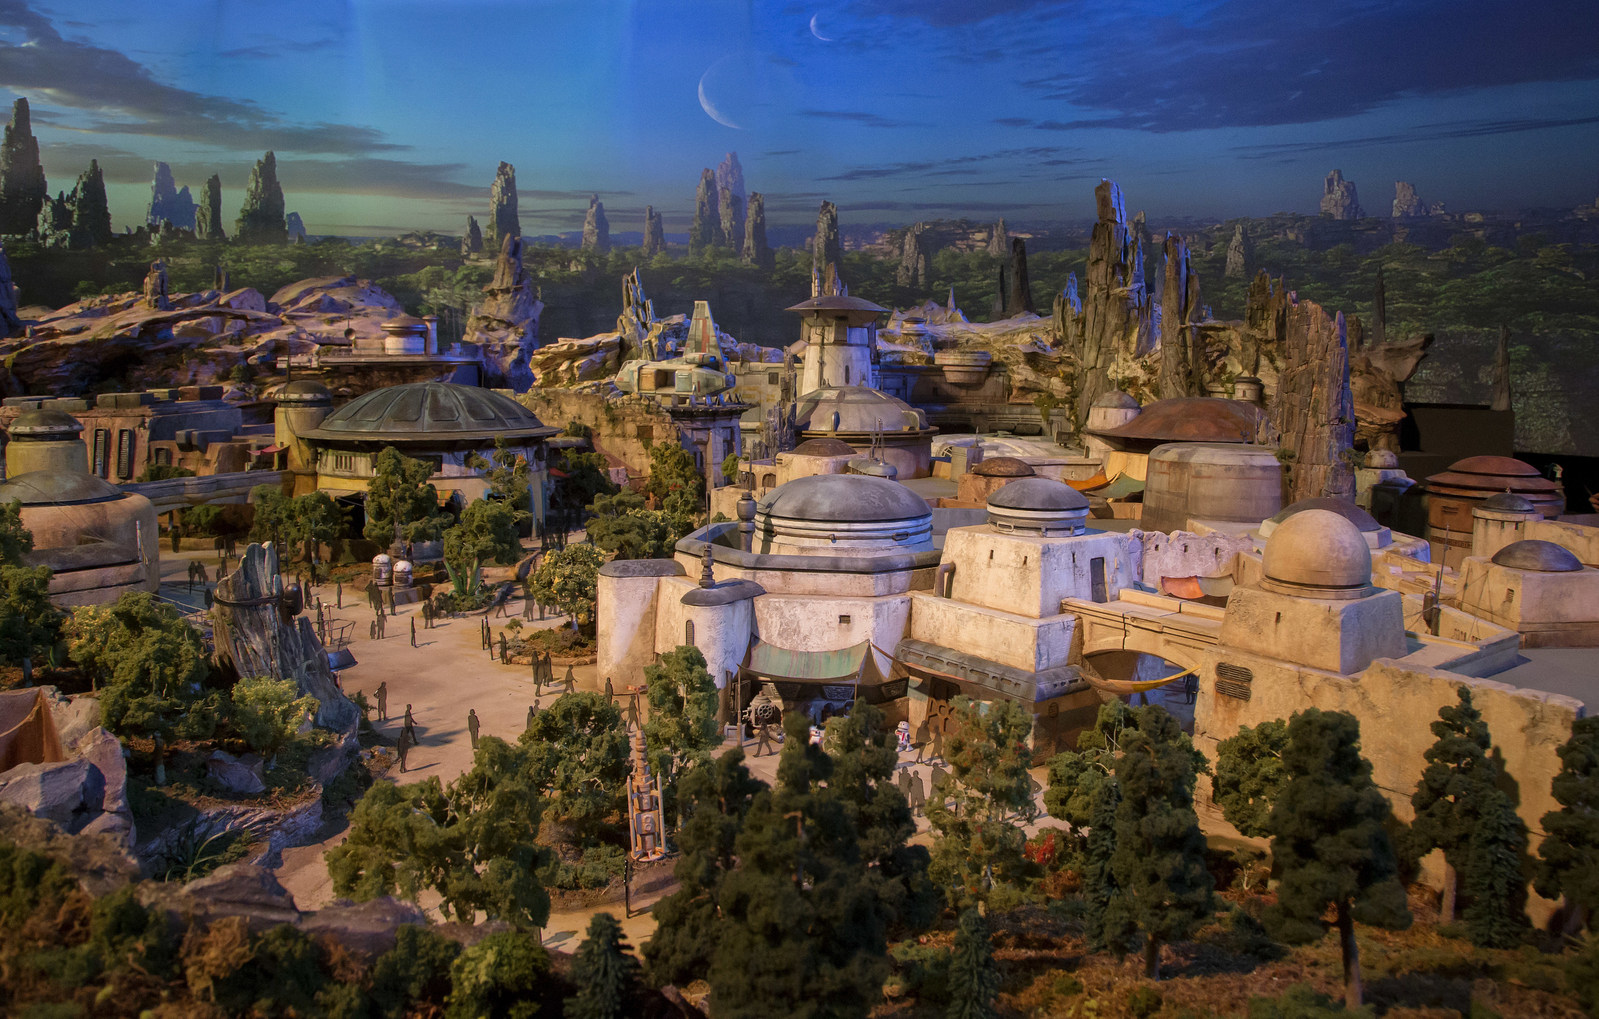 Today at D23 Expo 2017, Walt Disney Parks and Resorts Chairman Bob Chapek unveiled the epic detailed model of the Star Wars-themed lands coming to Disneyland park and Disney's Hollywood Studios, which will remain on display throughout the weekend as part of "A Galaxy of Stories" pavilion.